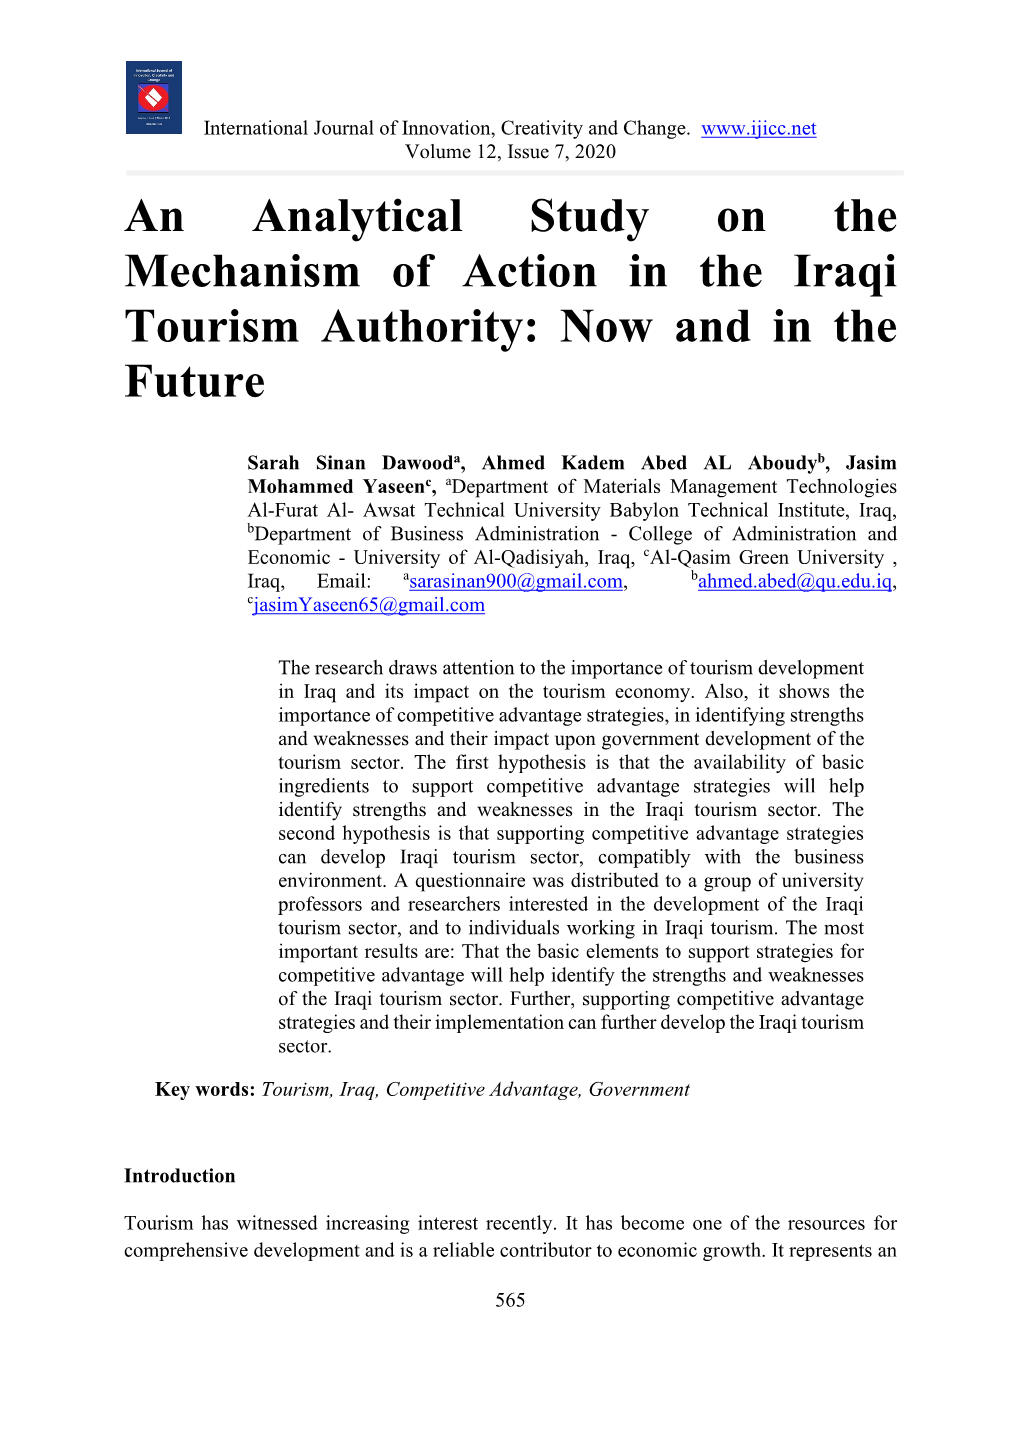 An Analytical Study on the Mechanism of Action in the Iraqi Tourism Authority: Now and in the Future